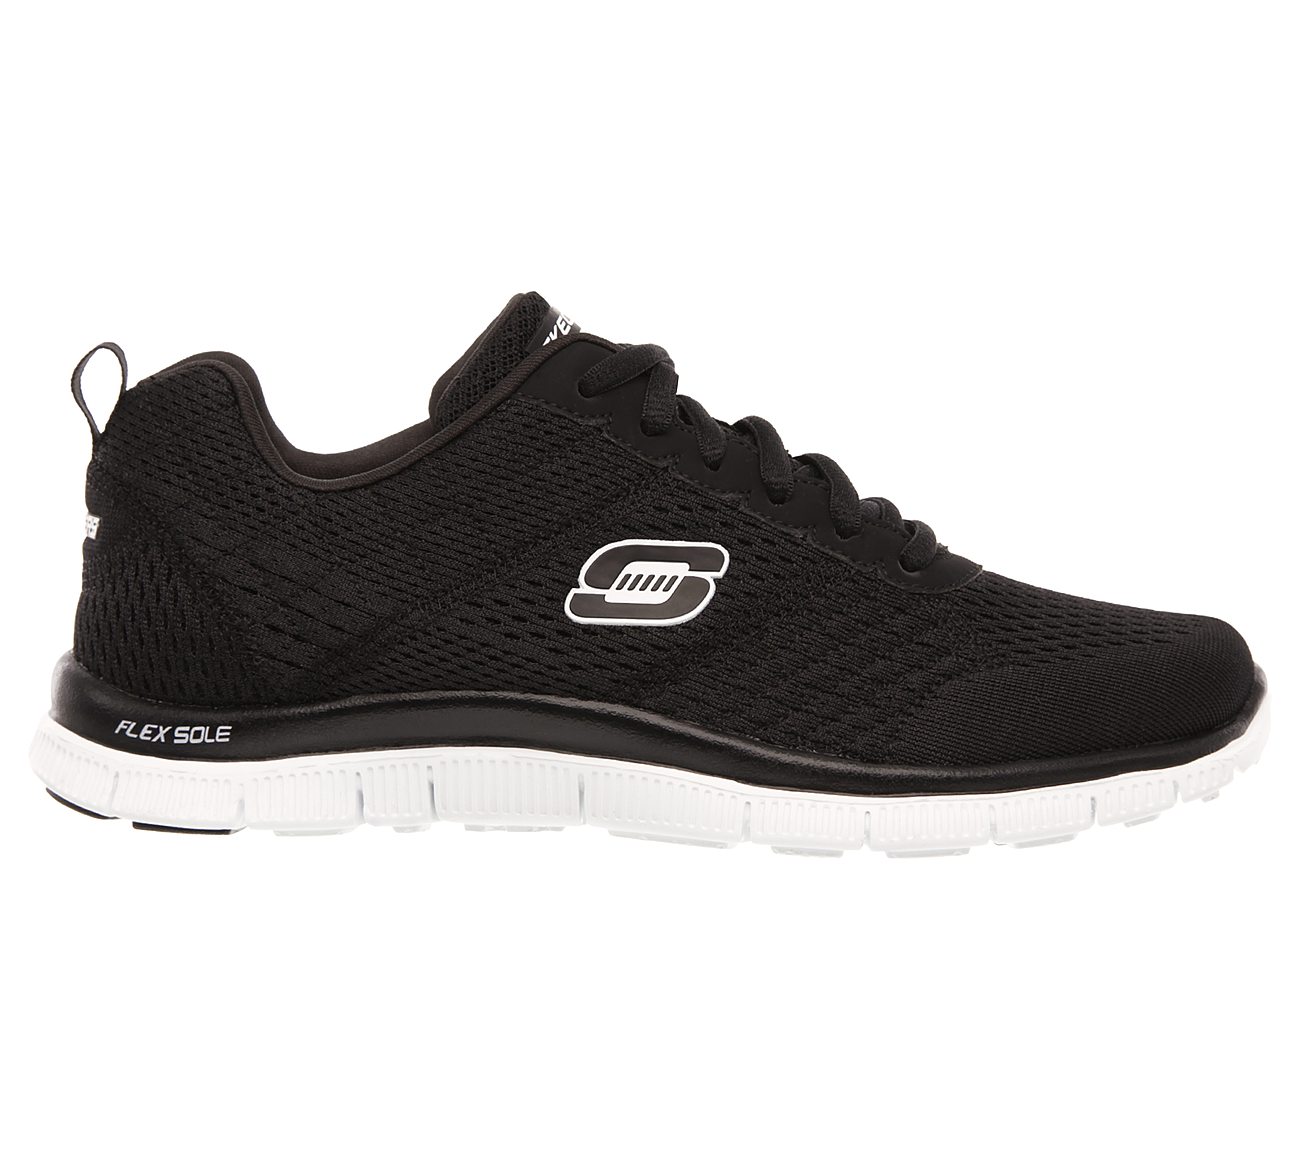 SKECHERS Flex Appeal - Obvious Choice 